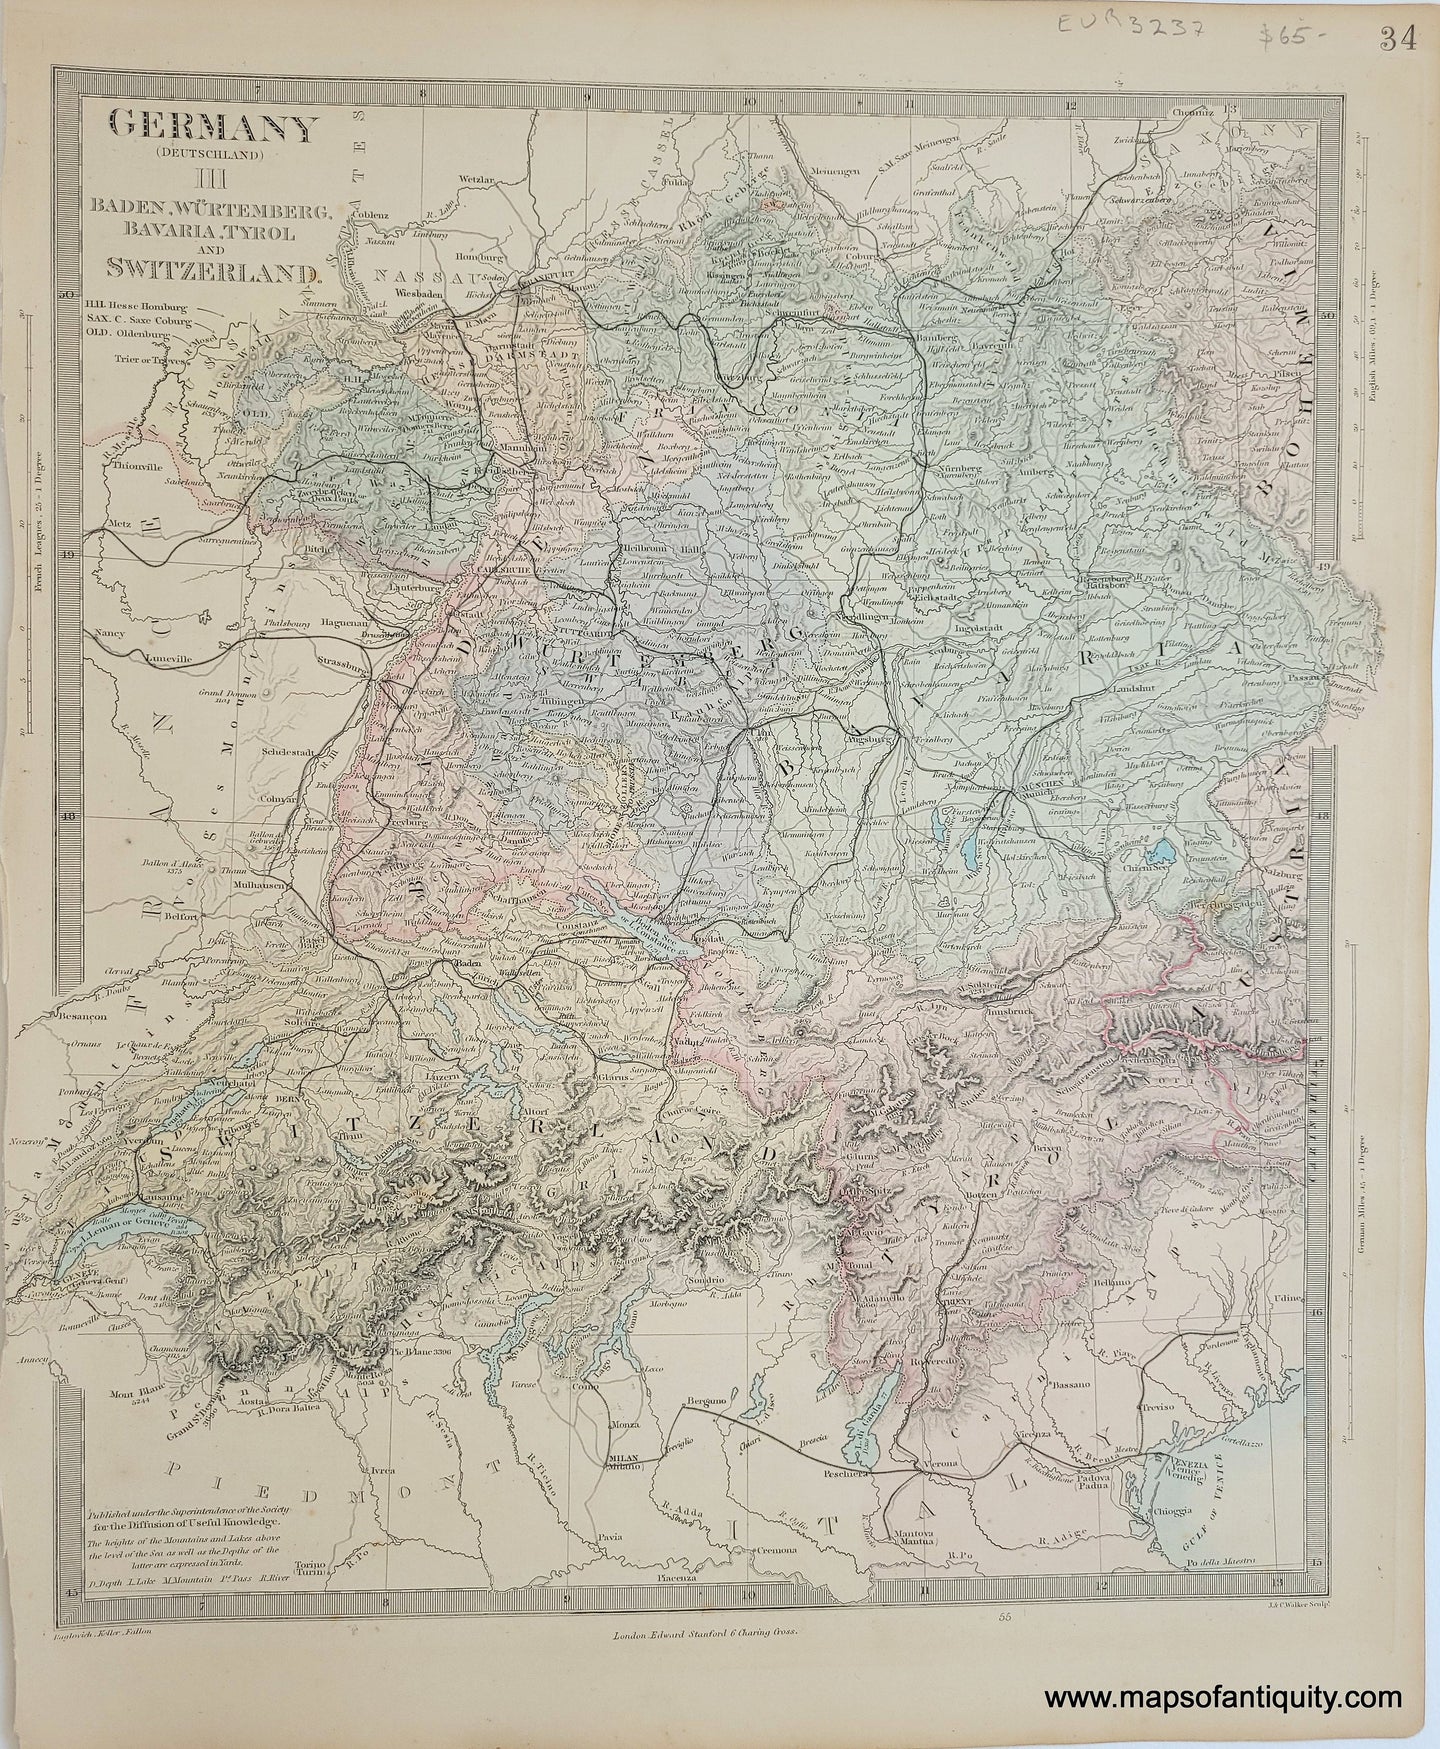 Genuine-Antique-Map-Germany-Deutschland-III-Baden-Wurtemberg-Bavaria-Tyrol-and-Switzerland-Germany--1860-SDUK-Society-for-the-Diffusion-of-Useful-Knowledge-Maps-Of-Antiquity-1800s-19th-century